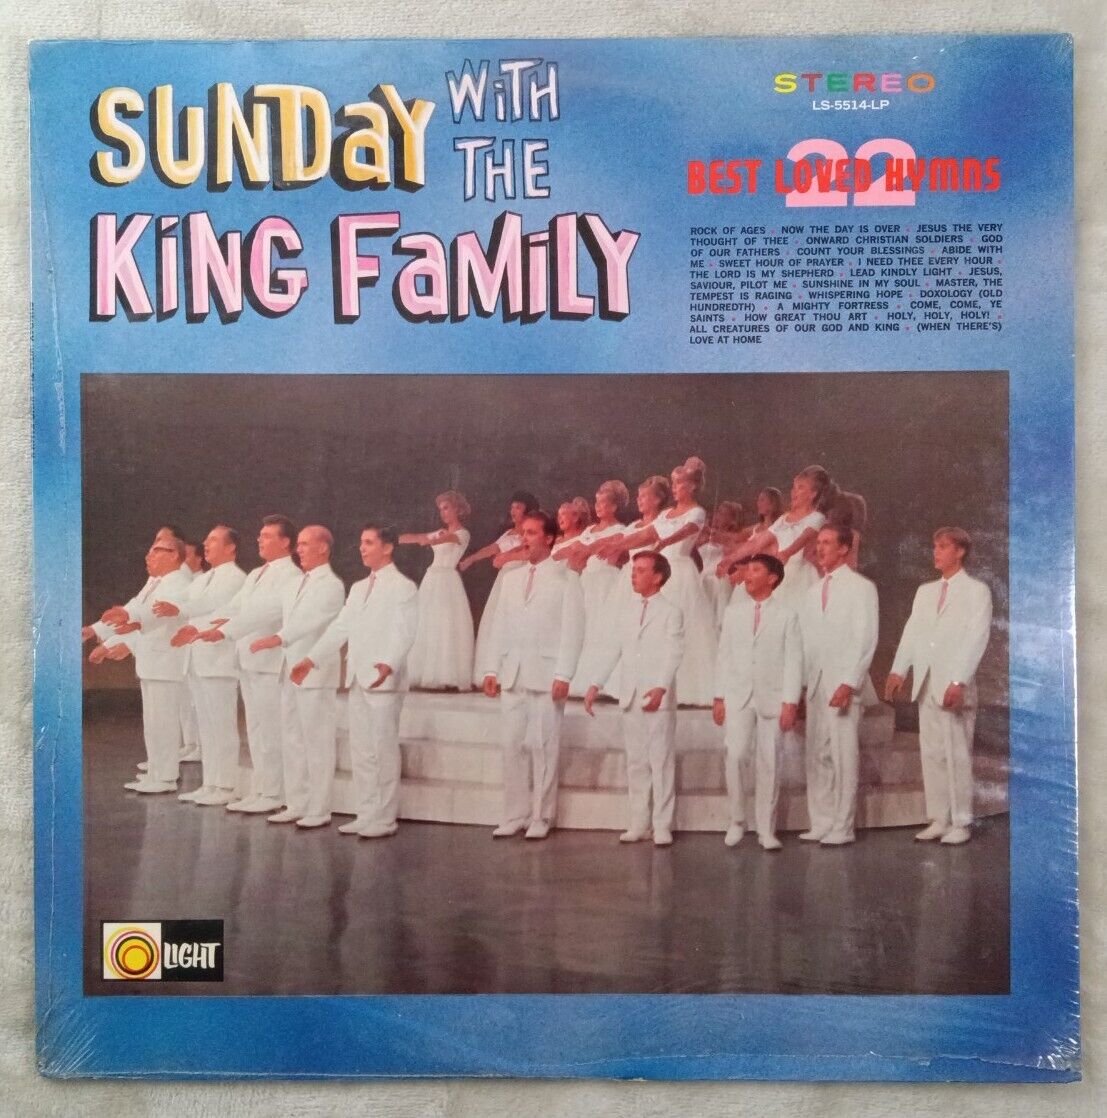 Sunday with the King family 22 best loved hymns SEALED LP record Light